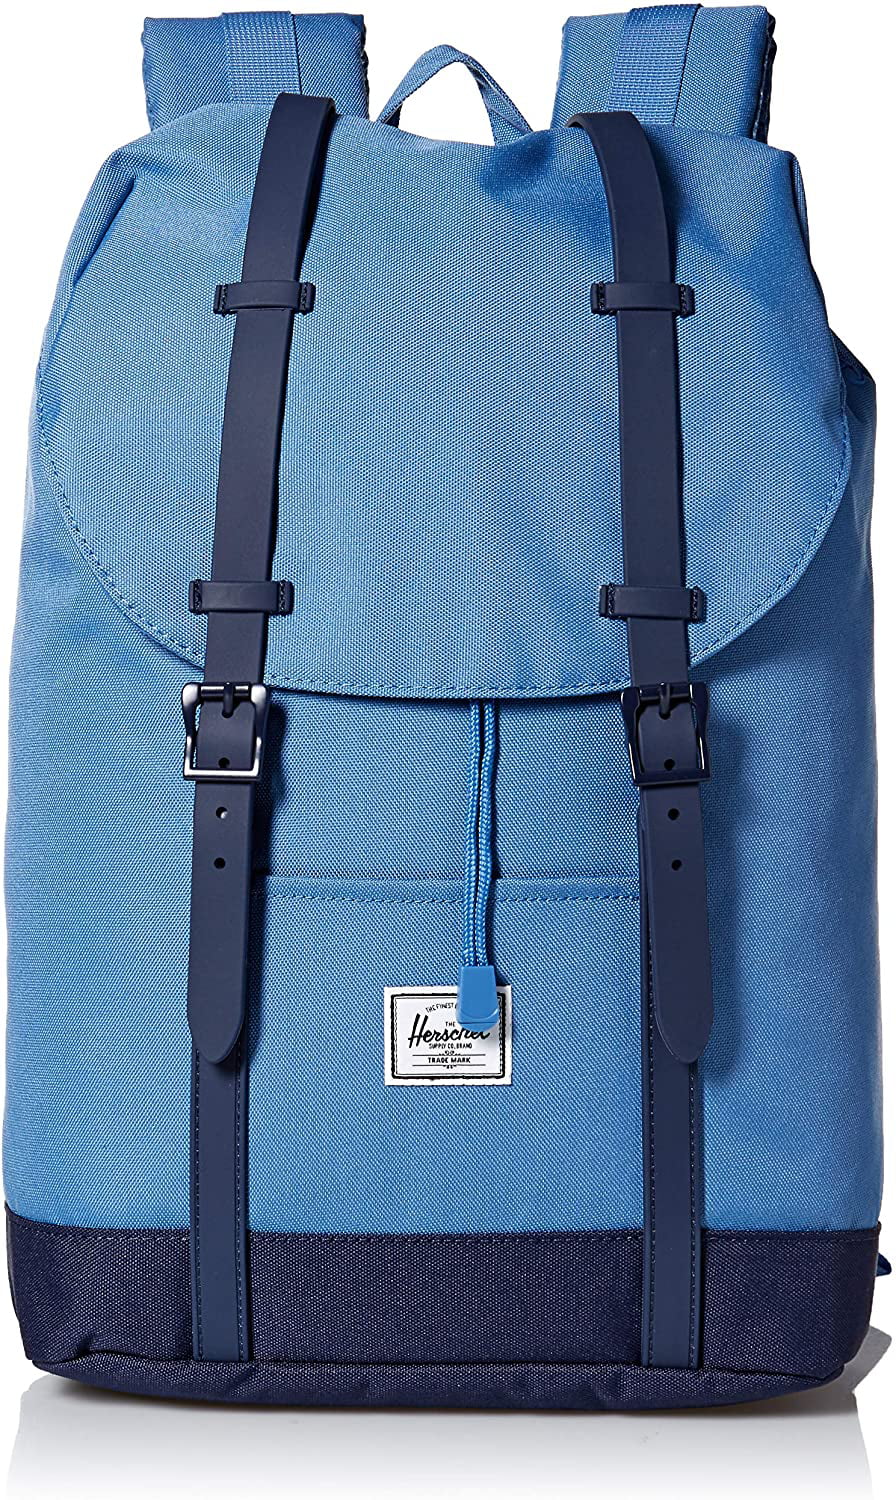 Herschel Retreat Backpack Navy/Tan Synthetic Leather Mid-Volume 14.0L 